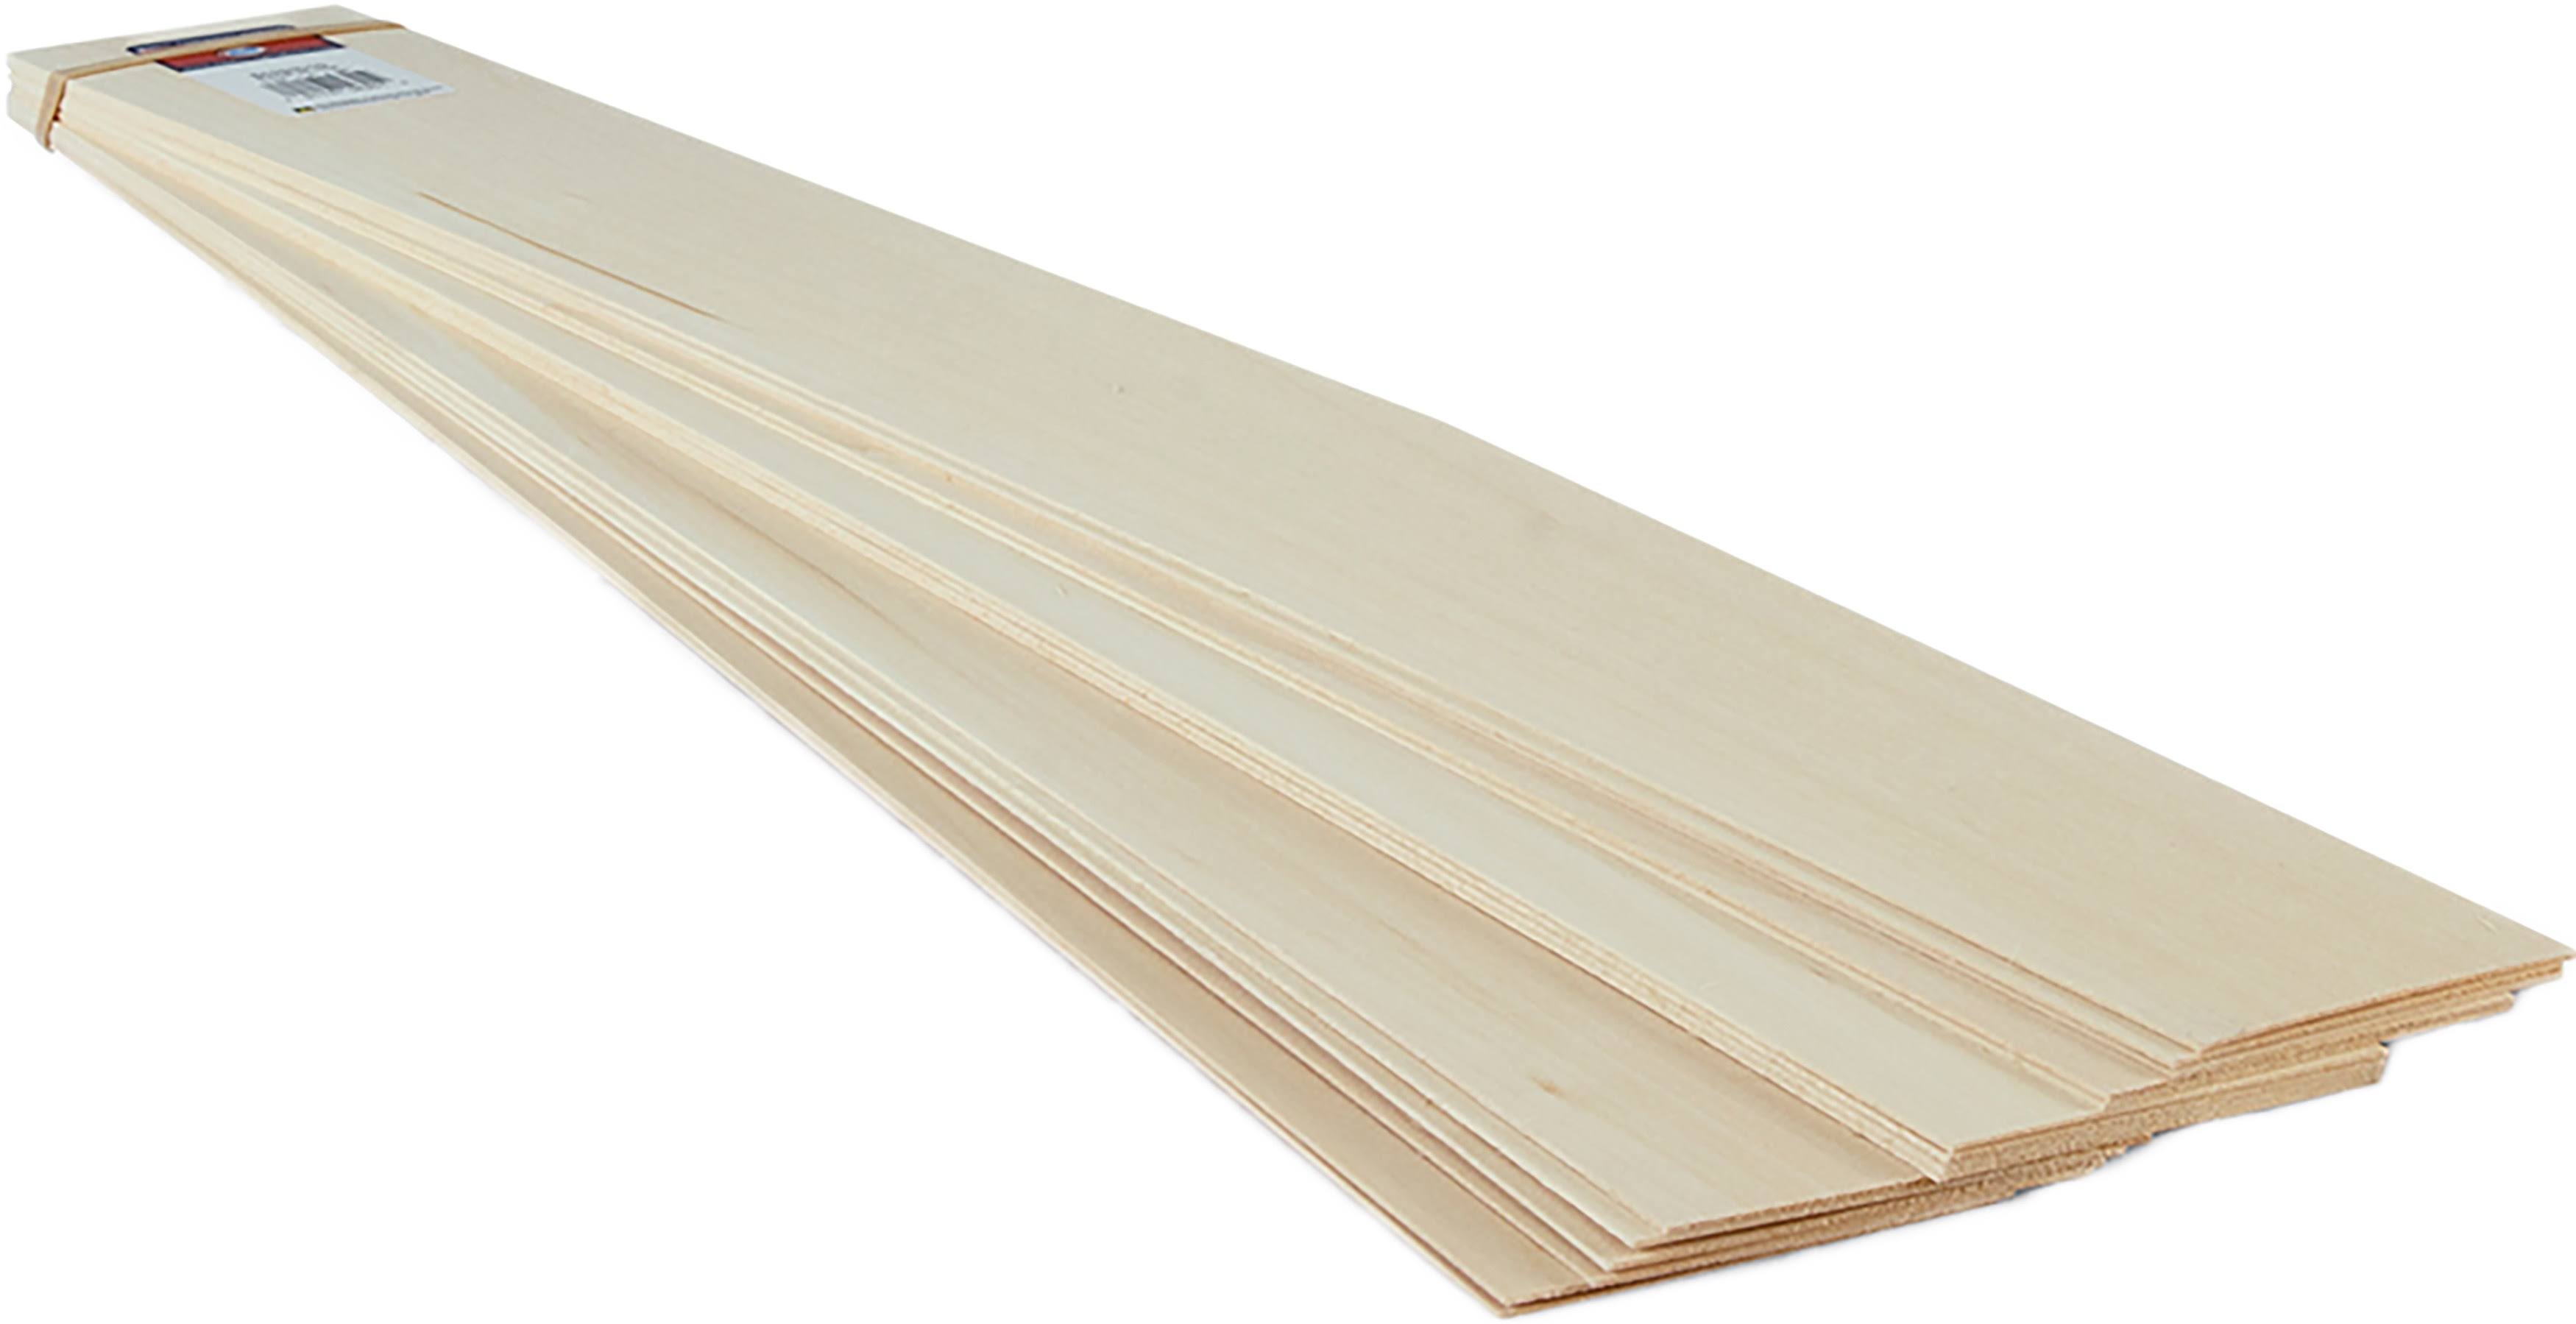 Midwest Basswood Sheet 1/32 x 3 x 24 in.